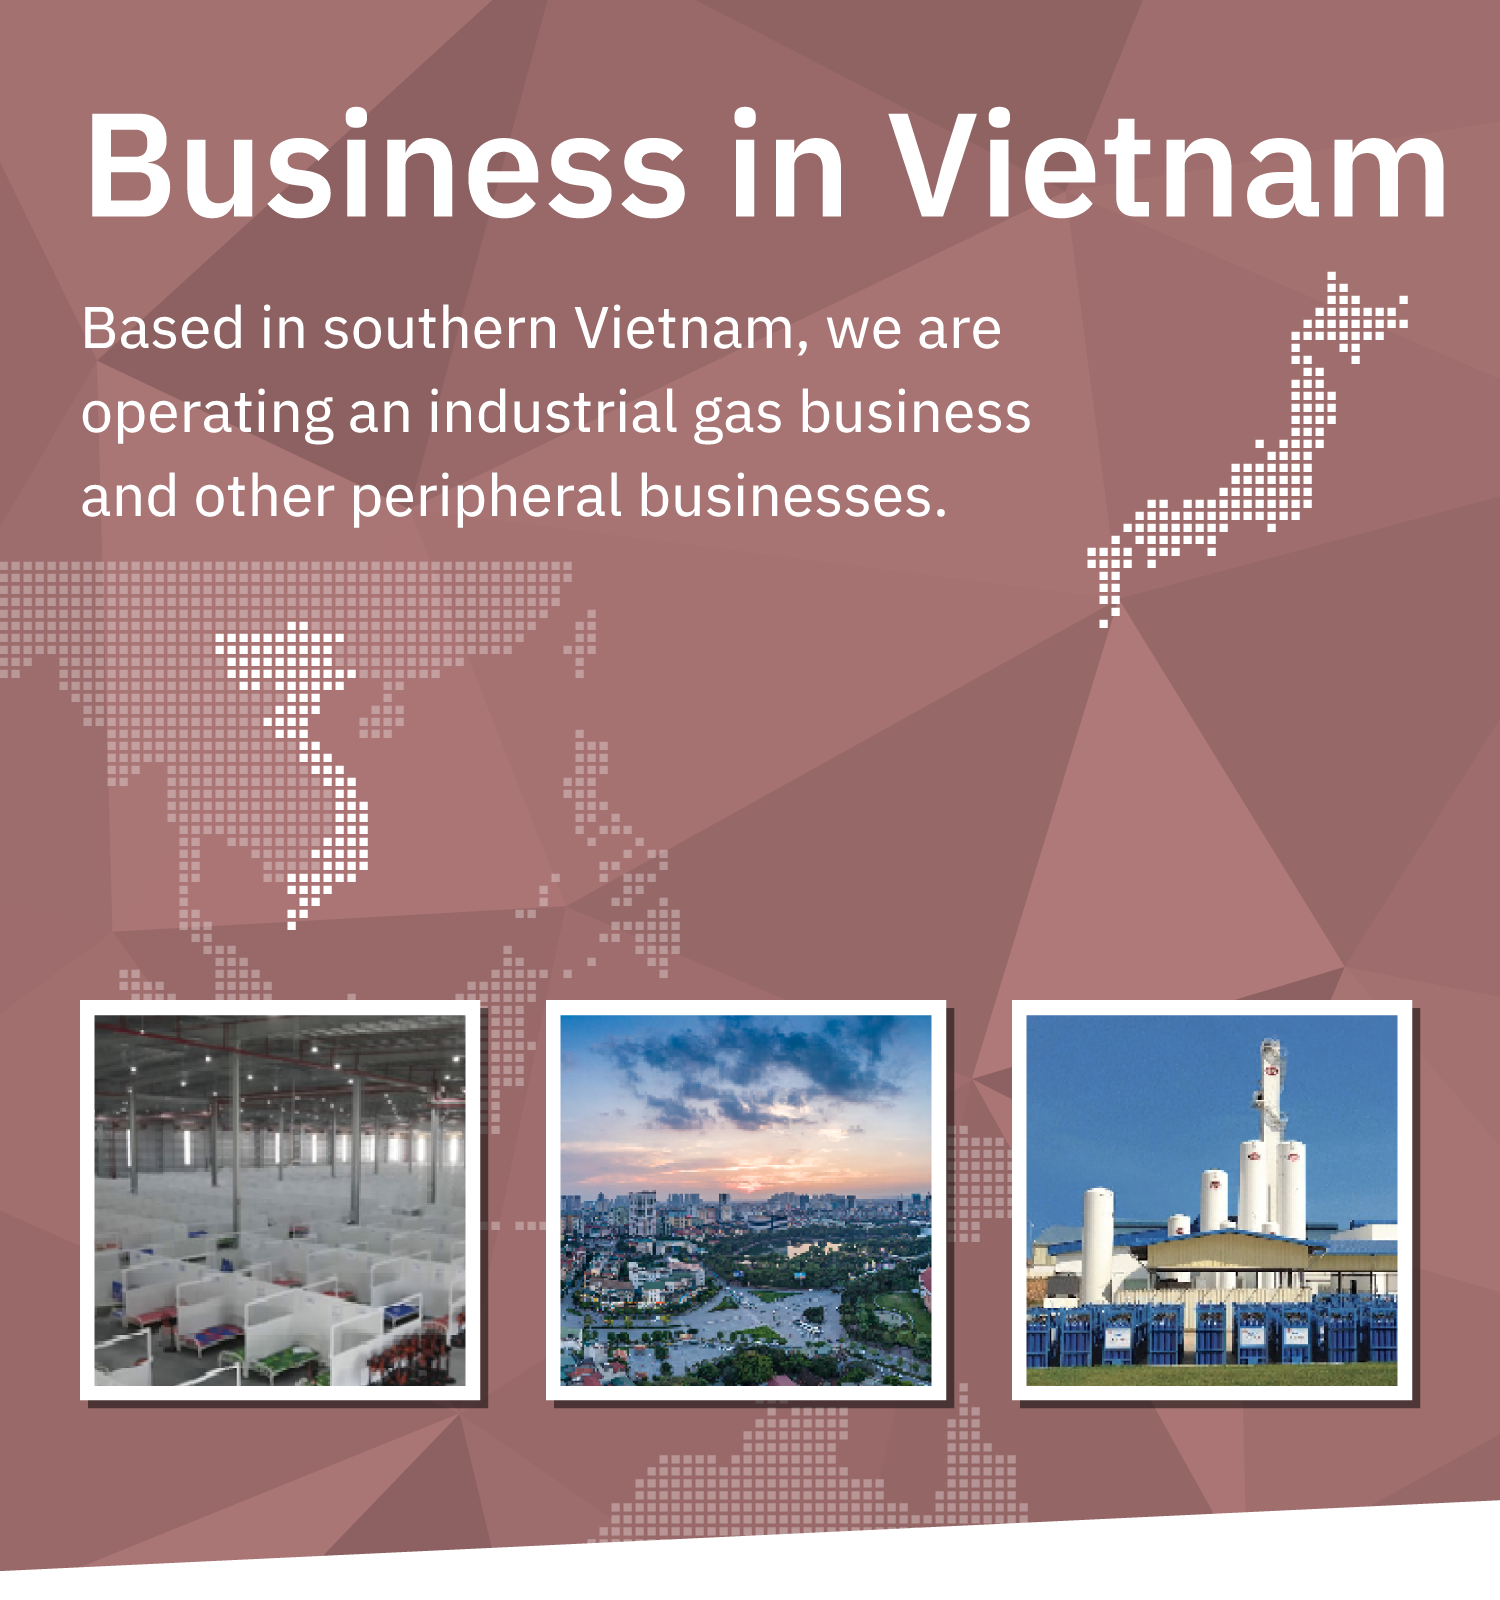 Business in Vietnam: Based in southern Vietnam, we are operating an industrial gas business and other peripheral businesses.